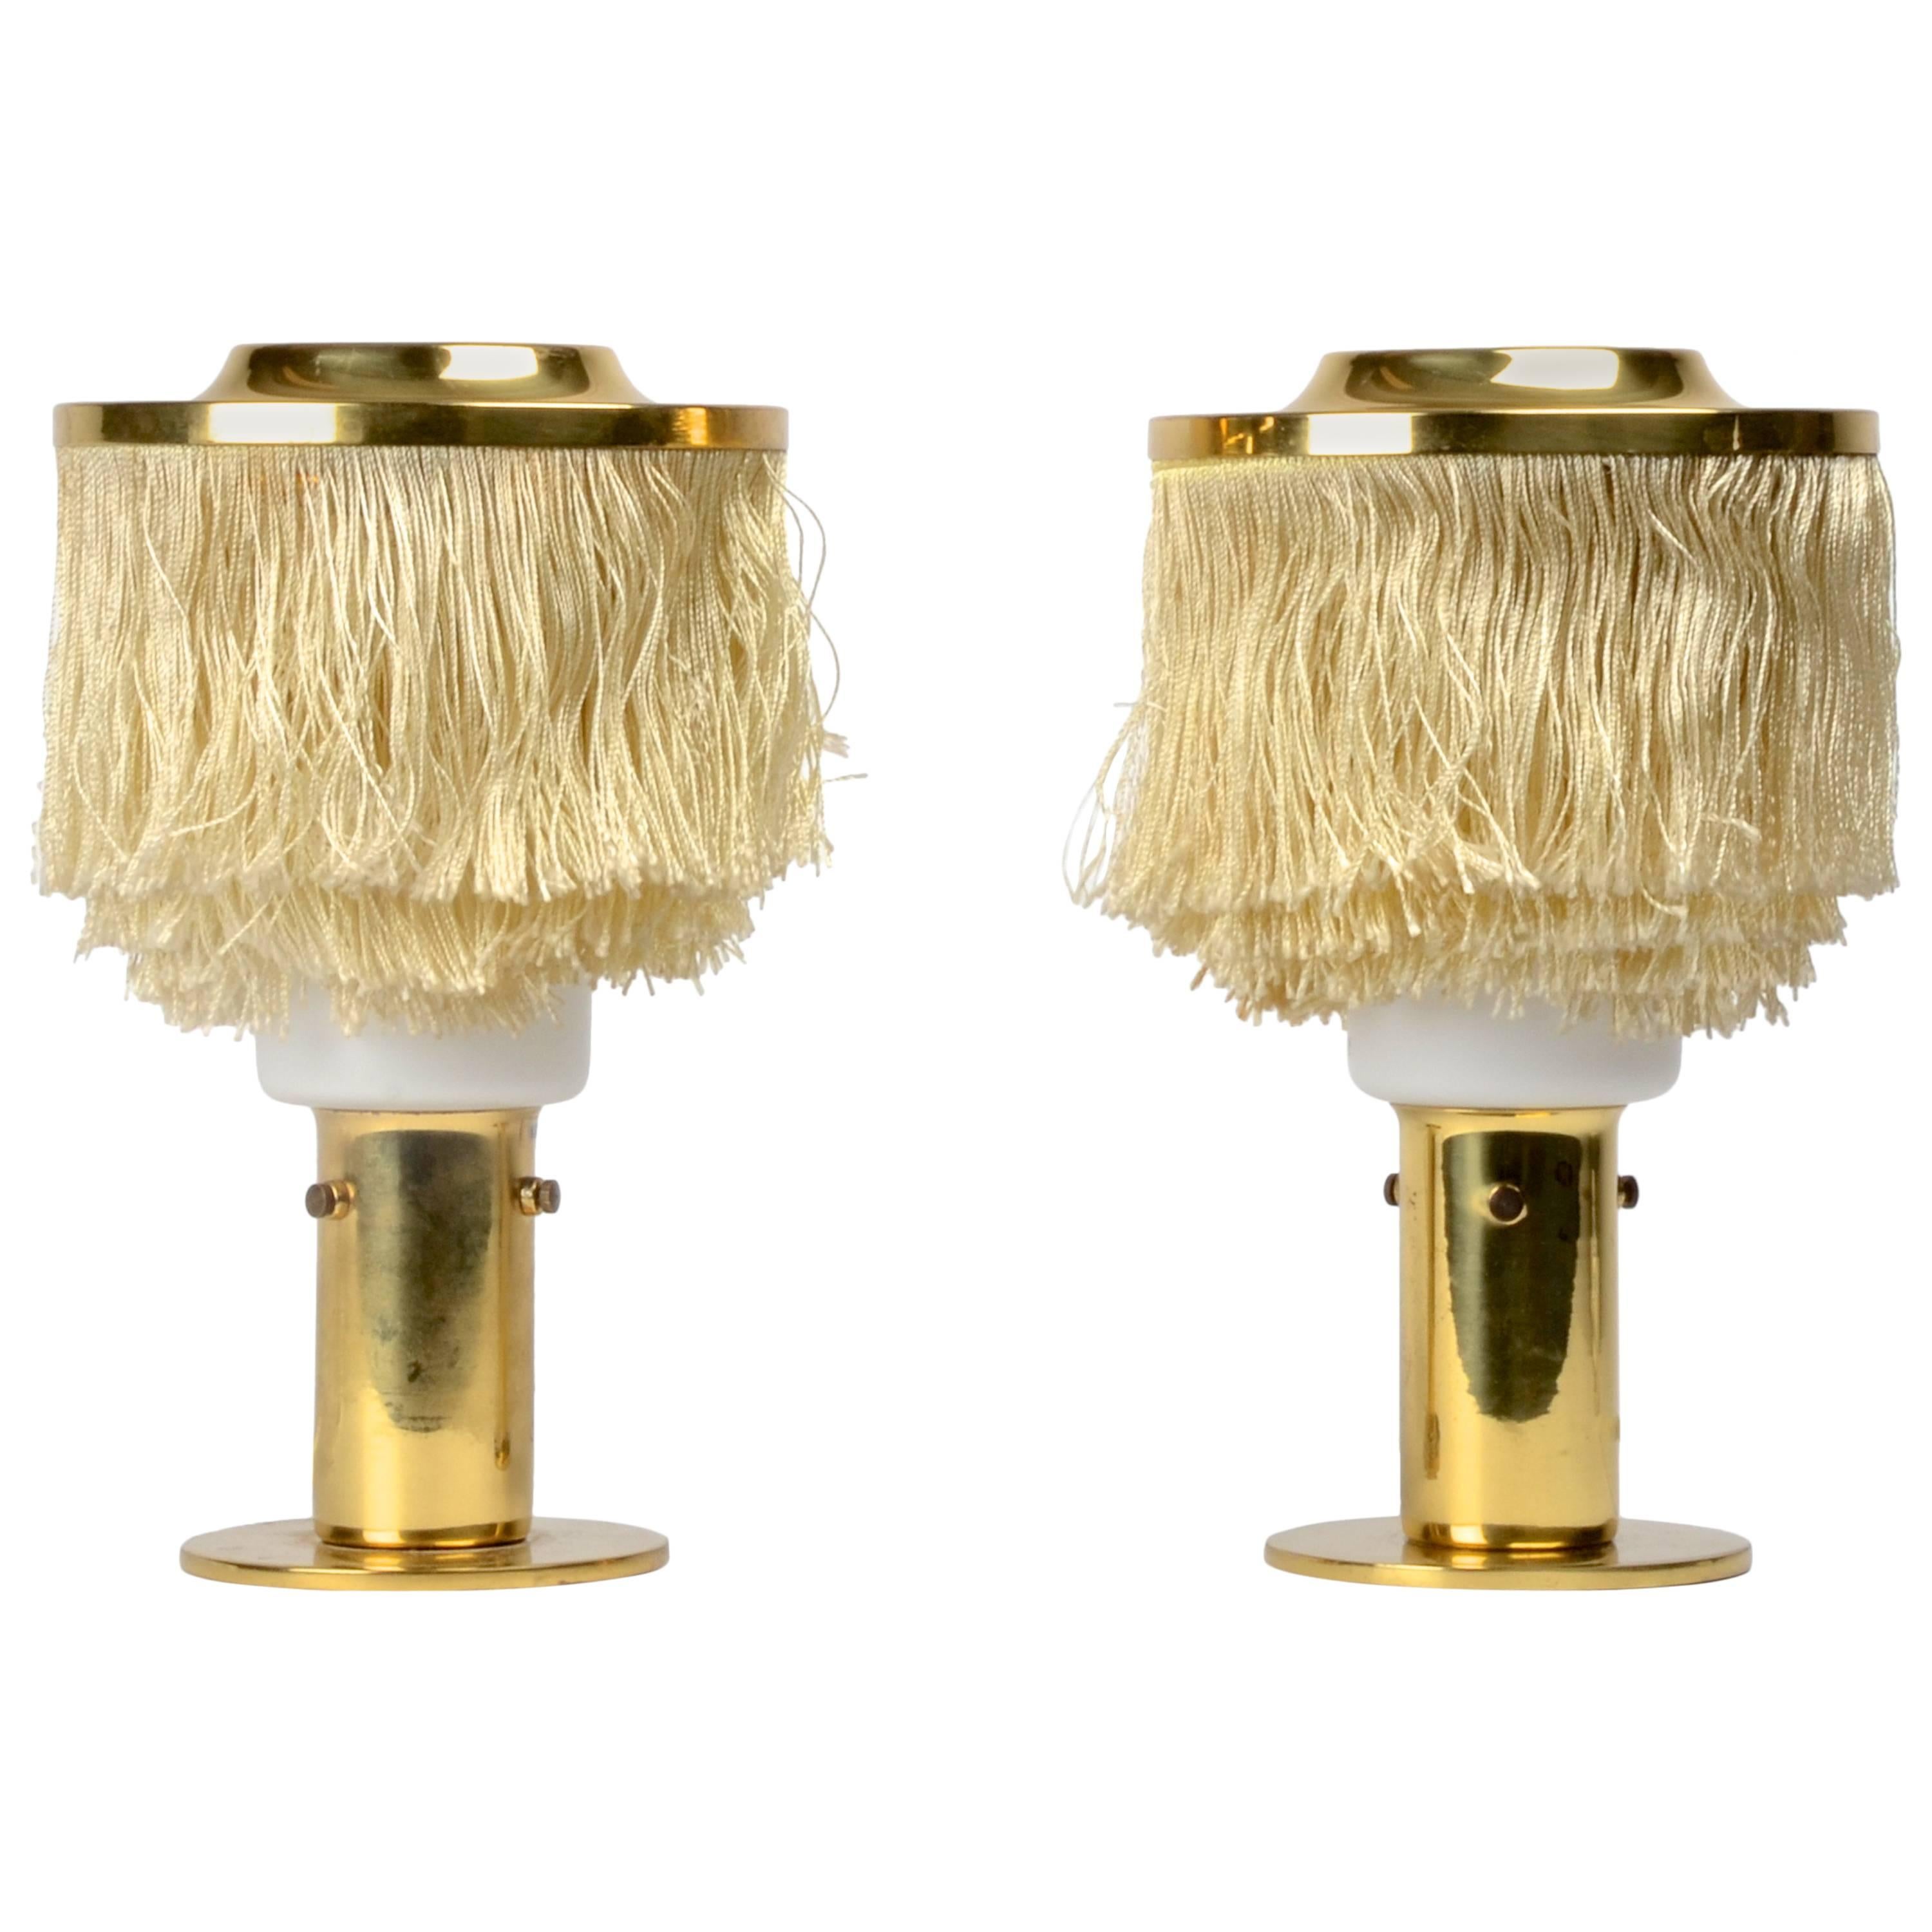 A Pair of Table Lamps by Hans-Agne Jakobsson, Markaryd, 1960s